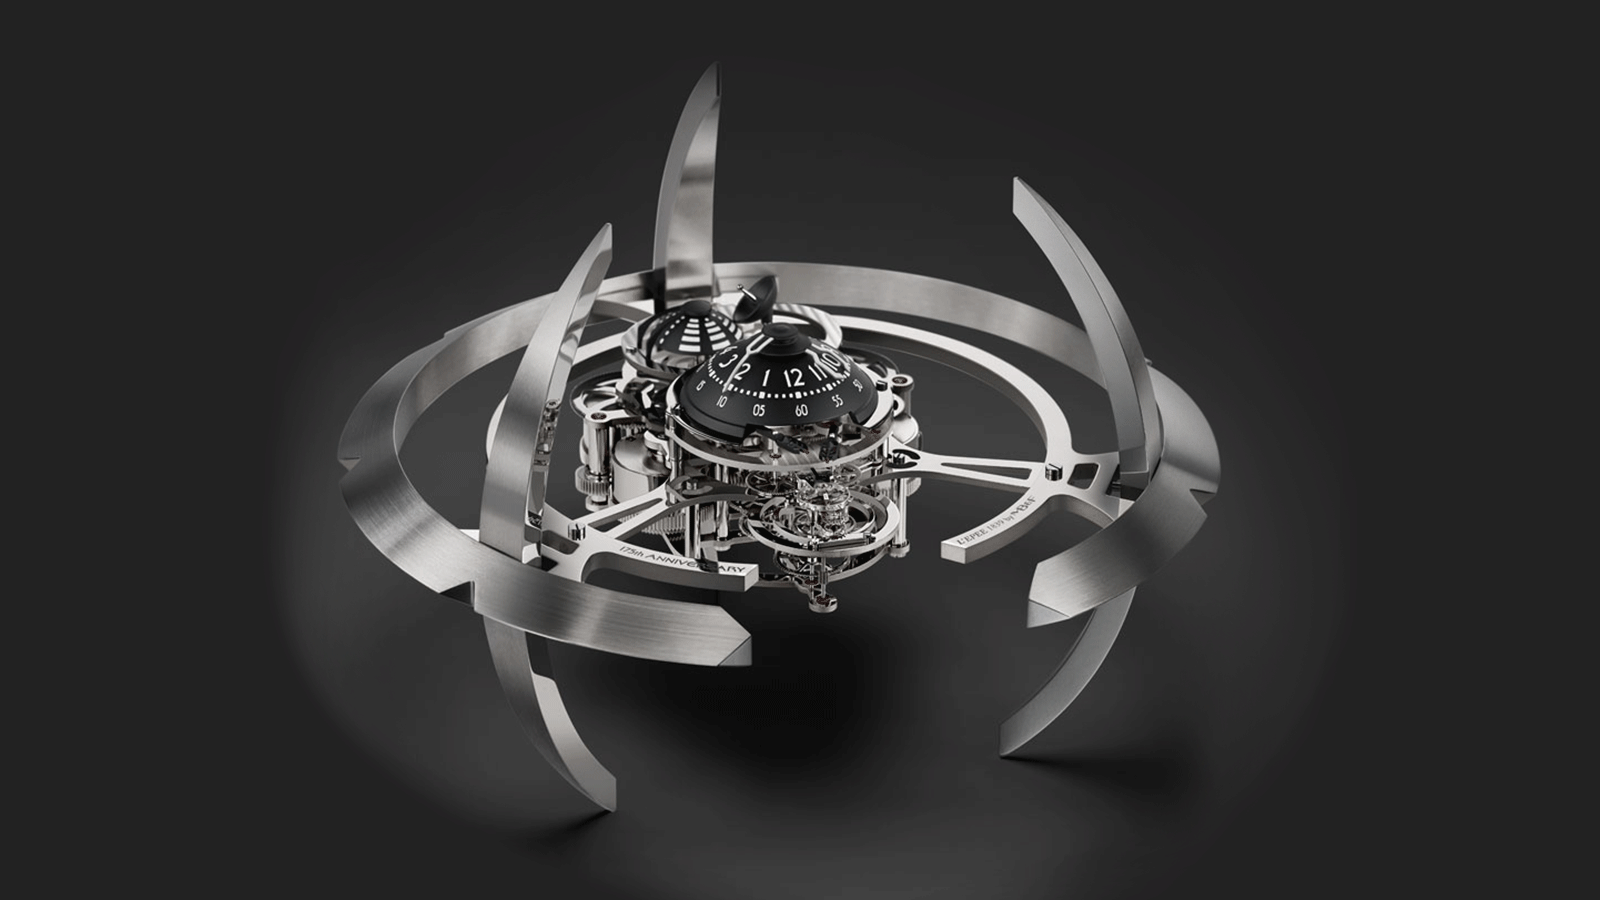 Enriching collections of unique kinetic horological sculptures with more spectacular collaborations, for the people that expect the unexpected.